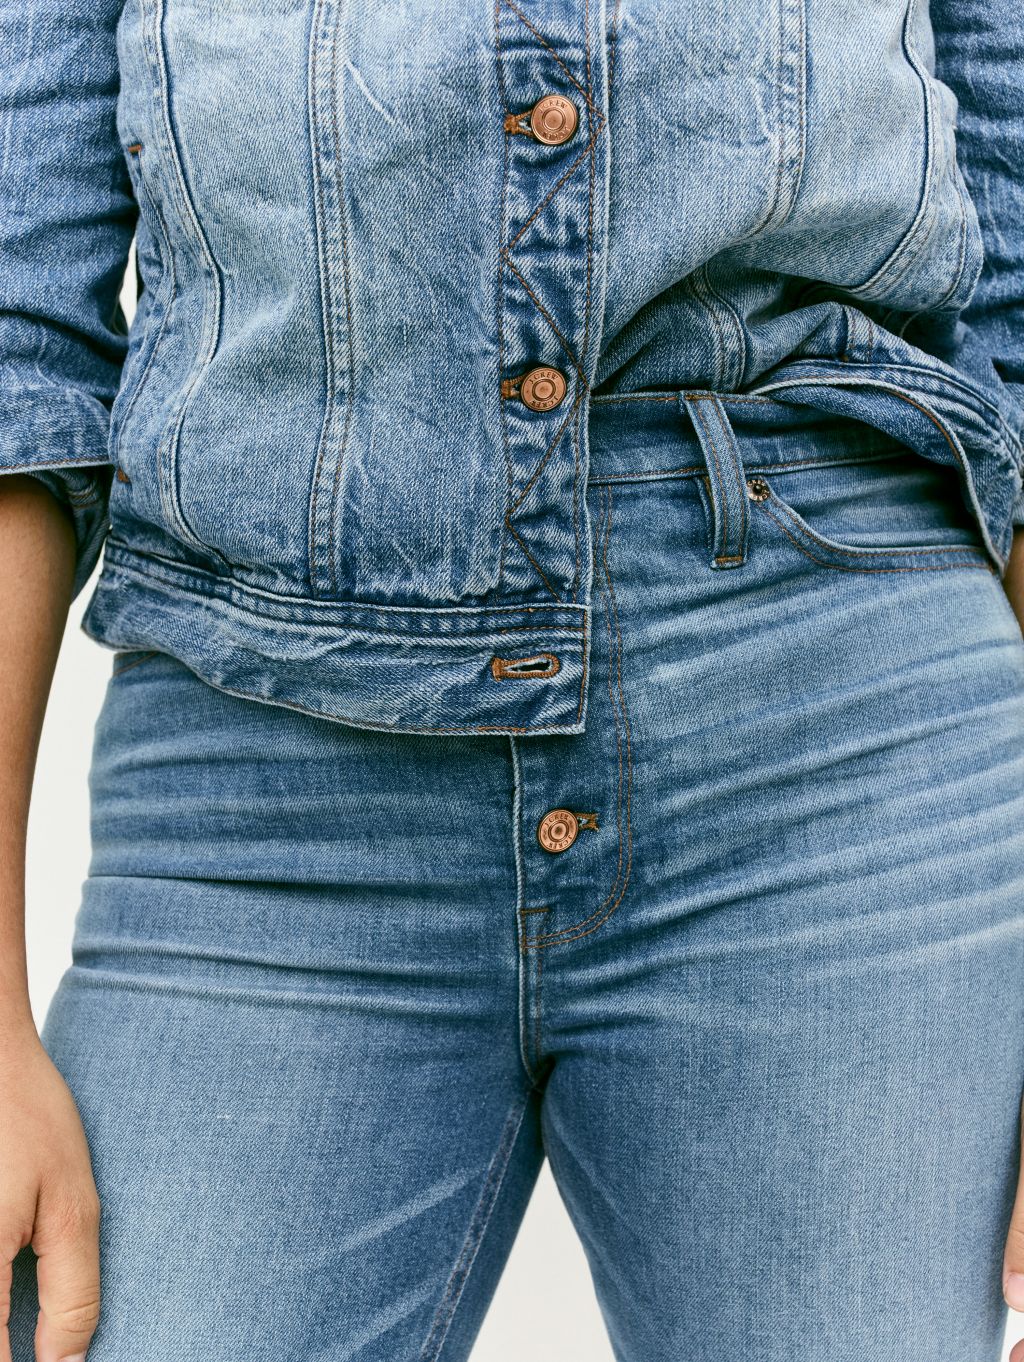 J.Crew Partnership with Blue Jeans Go Green